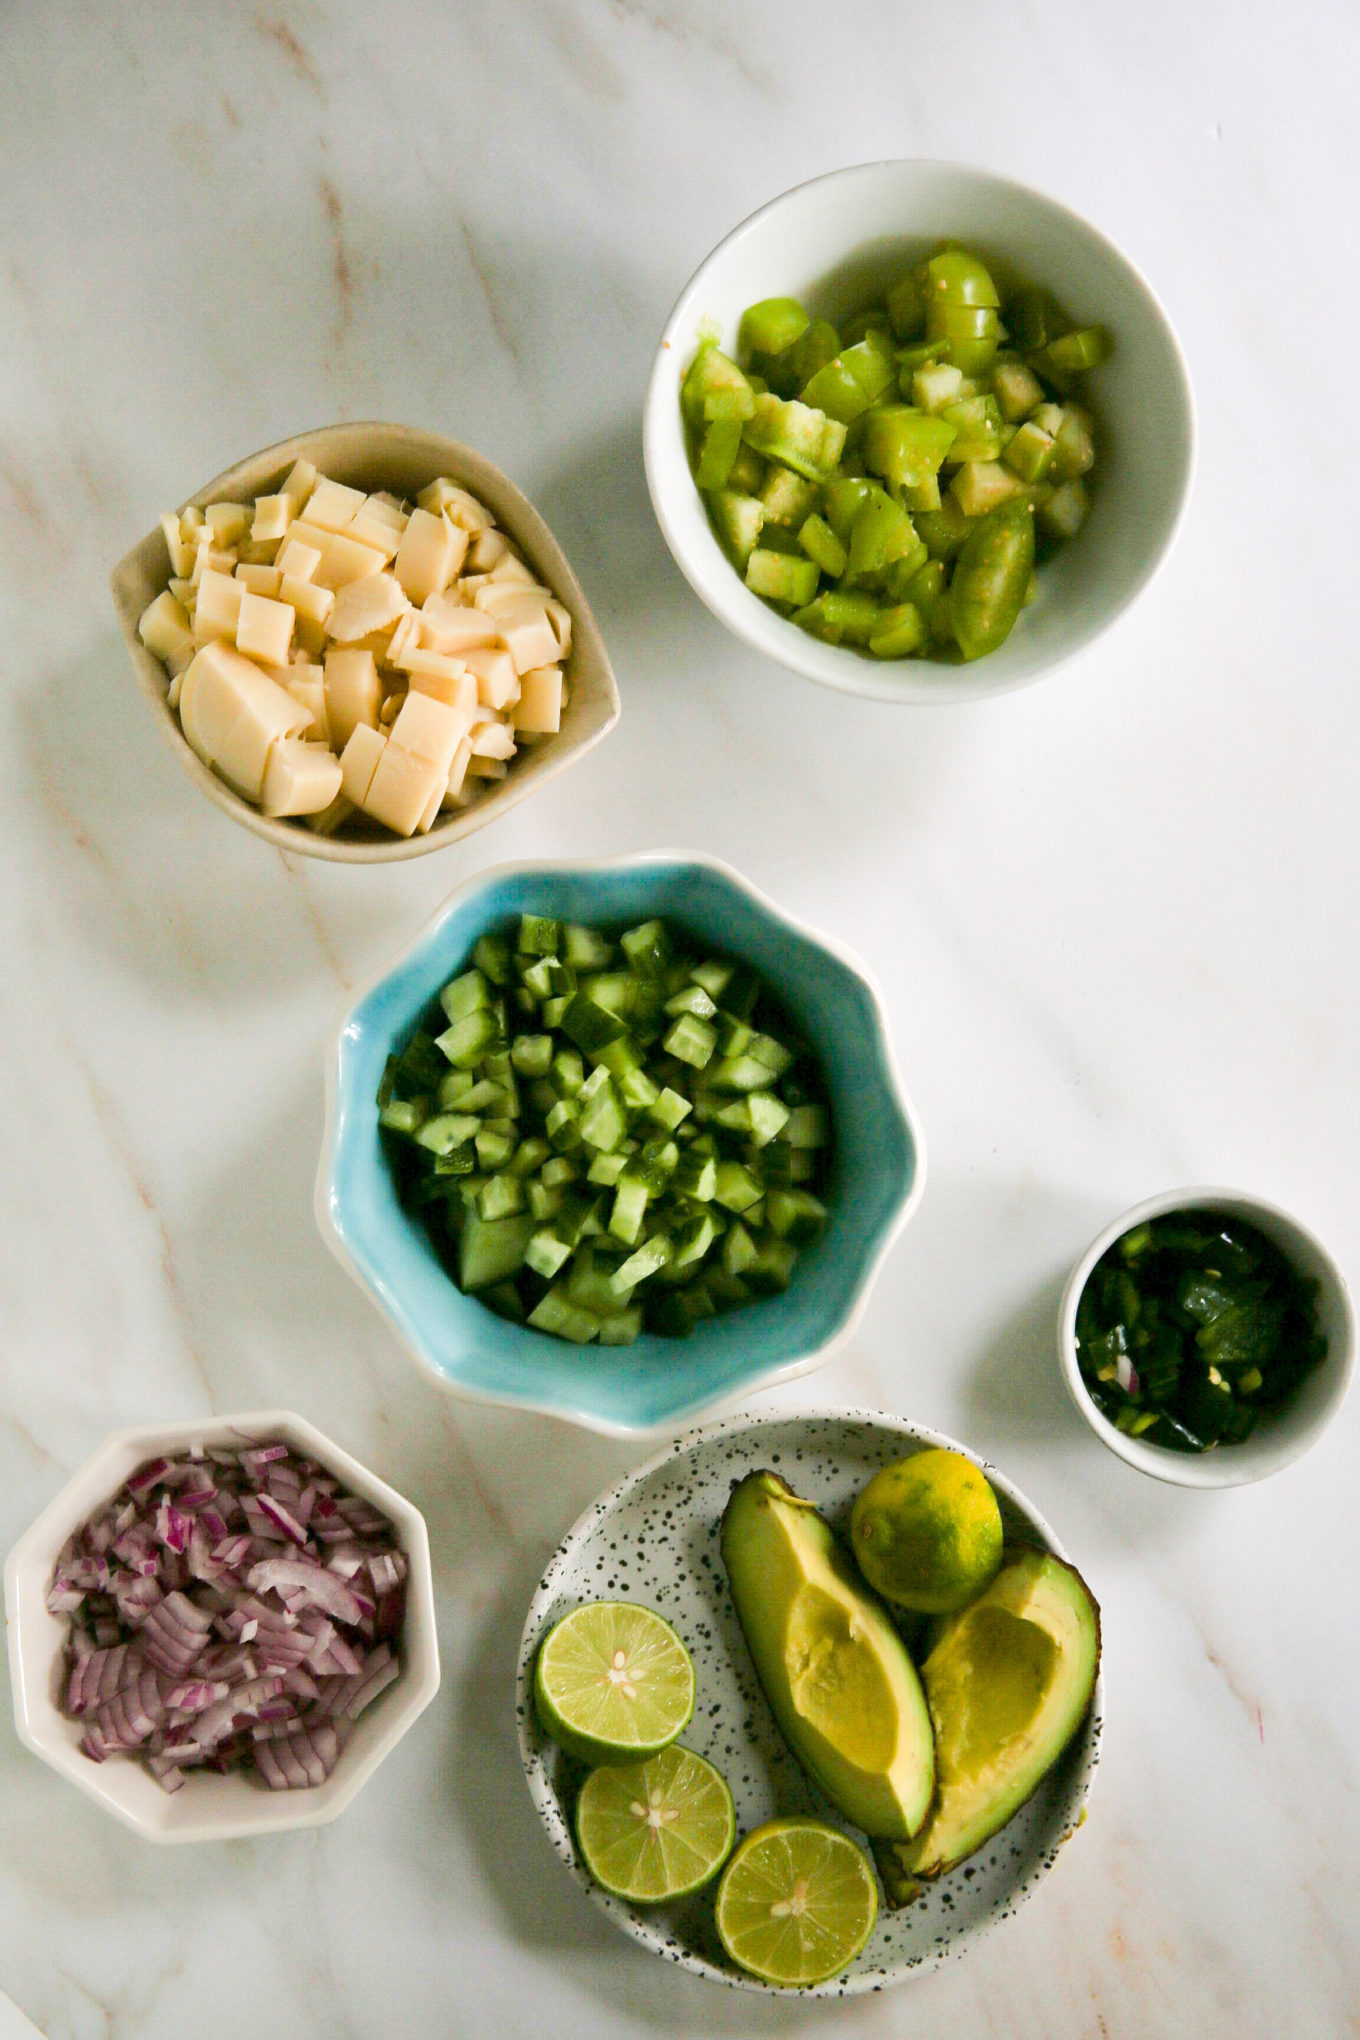 The guacamole ingredients, including the tostadas, are arranged on a table.